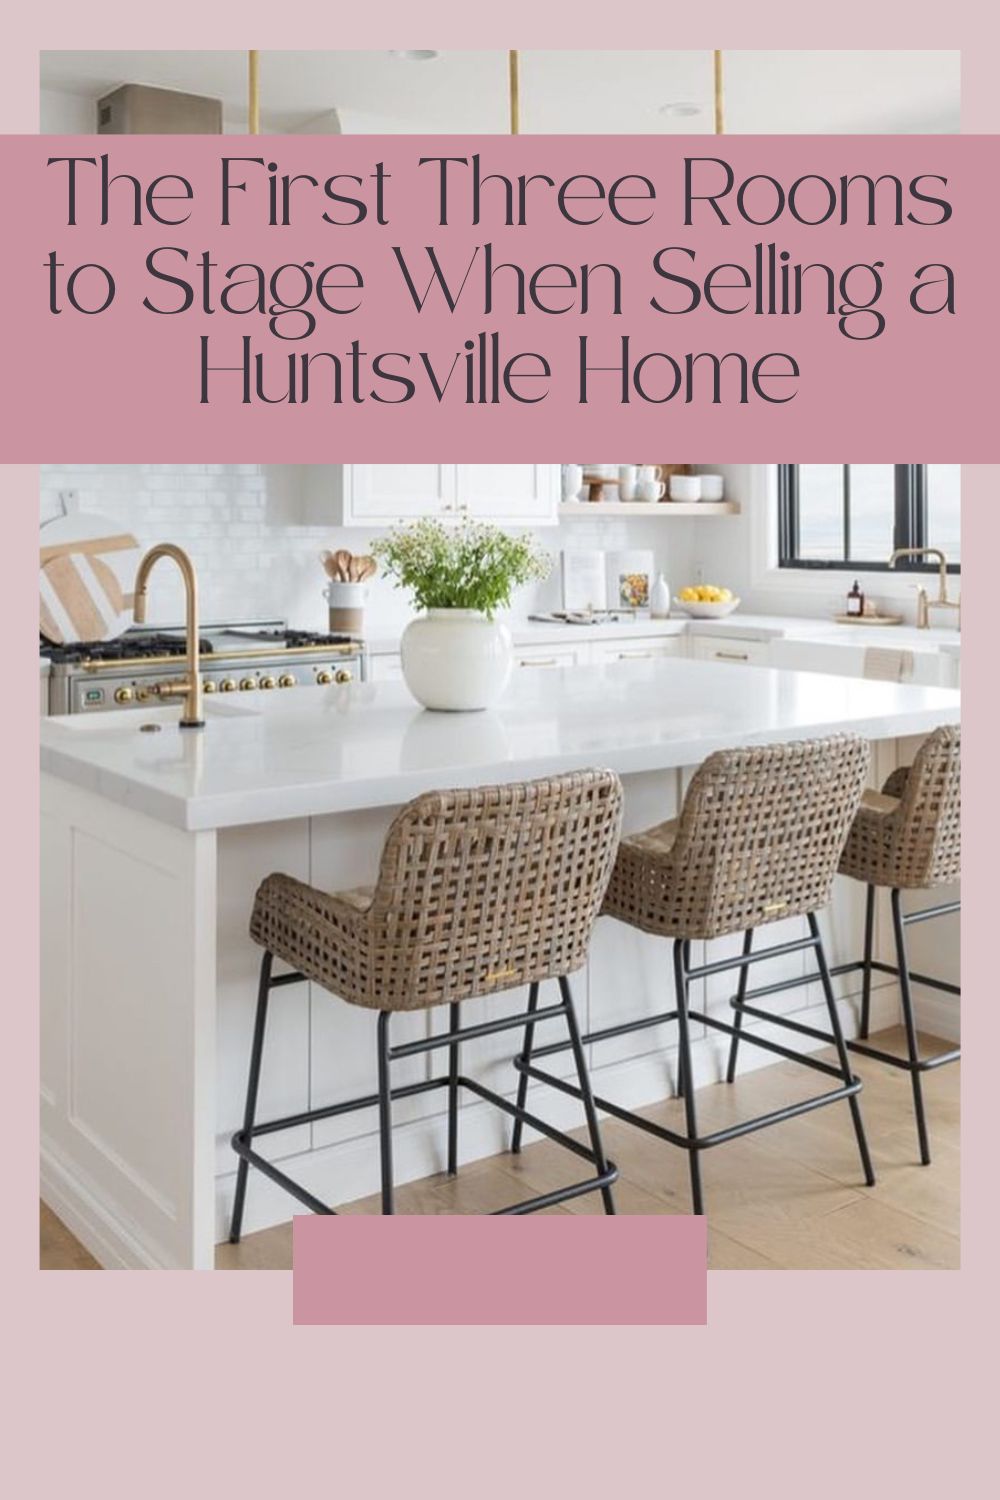 The First Three Rooms to Stage When Selling a Huntsville Home